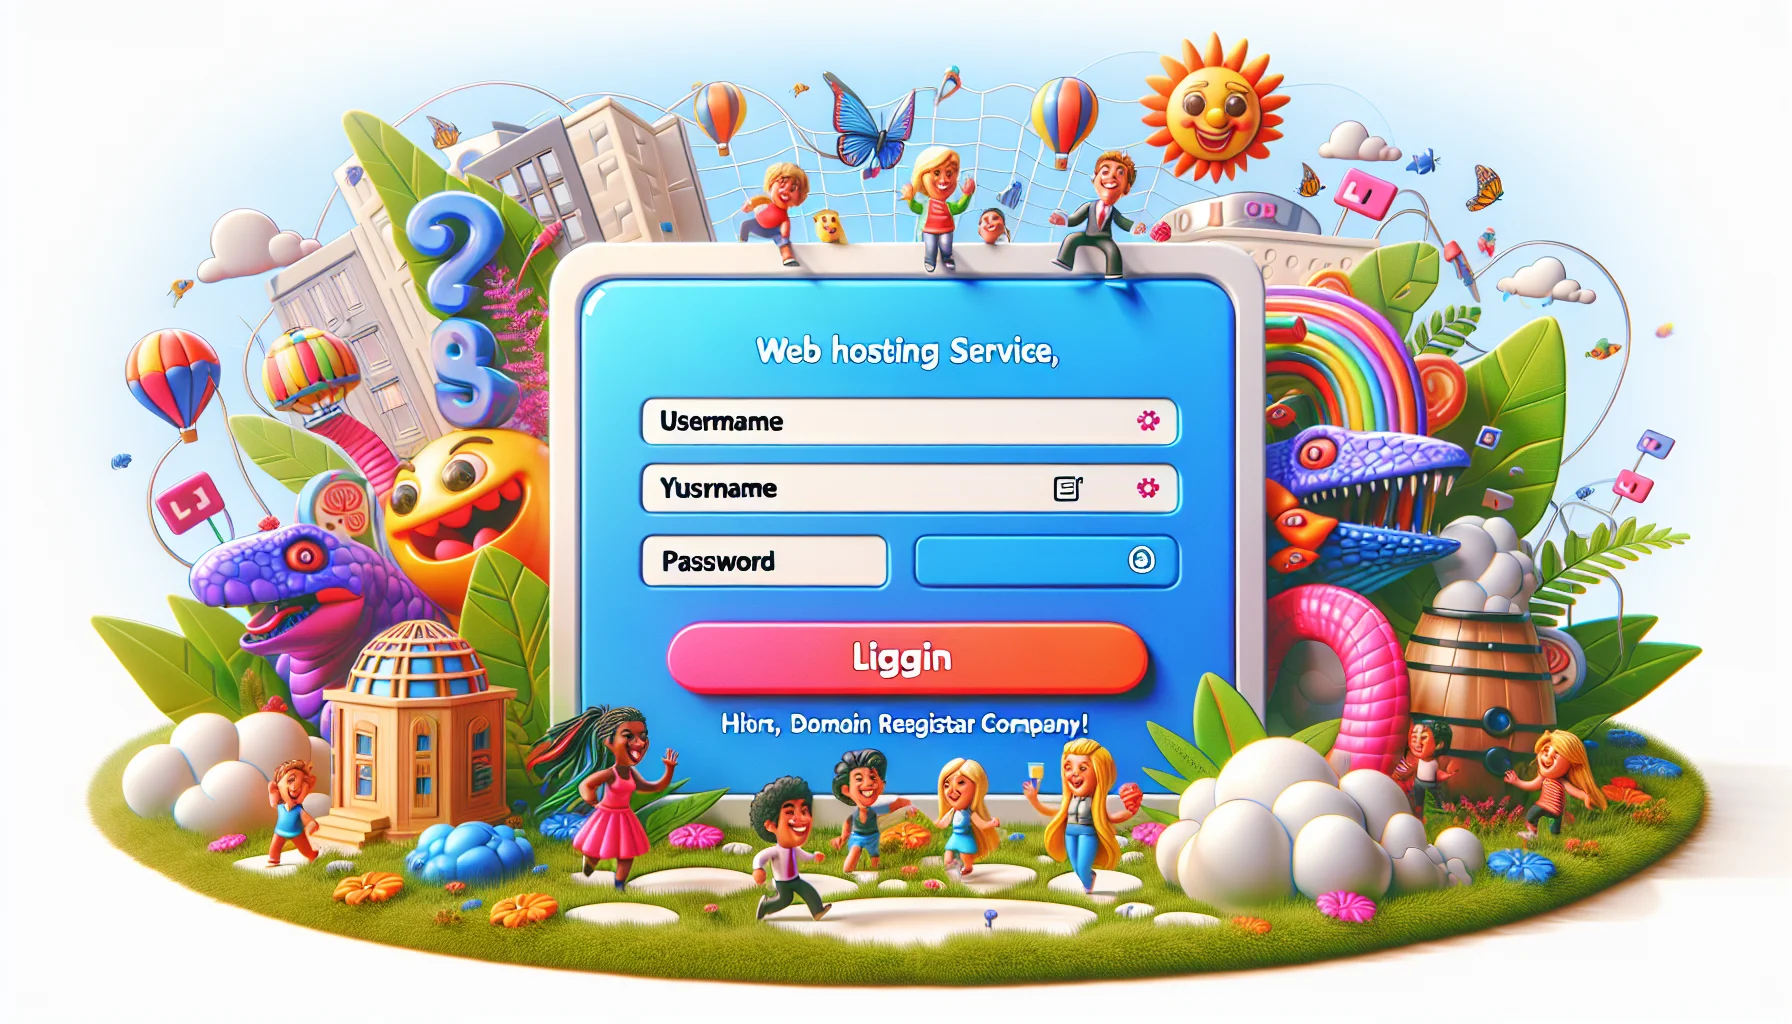 Create a humorous and realistic image displaying a fictional web hosting service, domain registrar company login page that looks enticing. The login page should be presented in a lighthearted way that emphasizes the ease of use, with visible elements such as a sizeable 'Login' button and intuitive fields for 'Username' and 'Password'. All the while, depicting playful virtual representations using bright colors and cartoon-like elements interacting with the web hosting interface in a user-friendly environment.